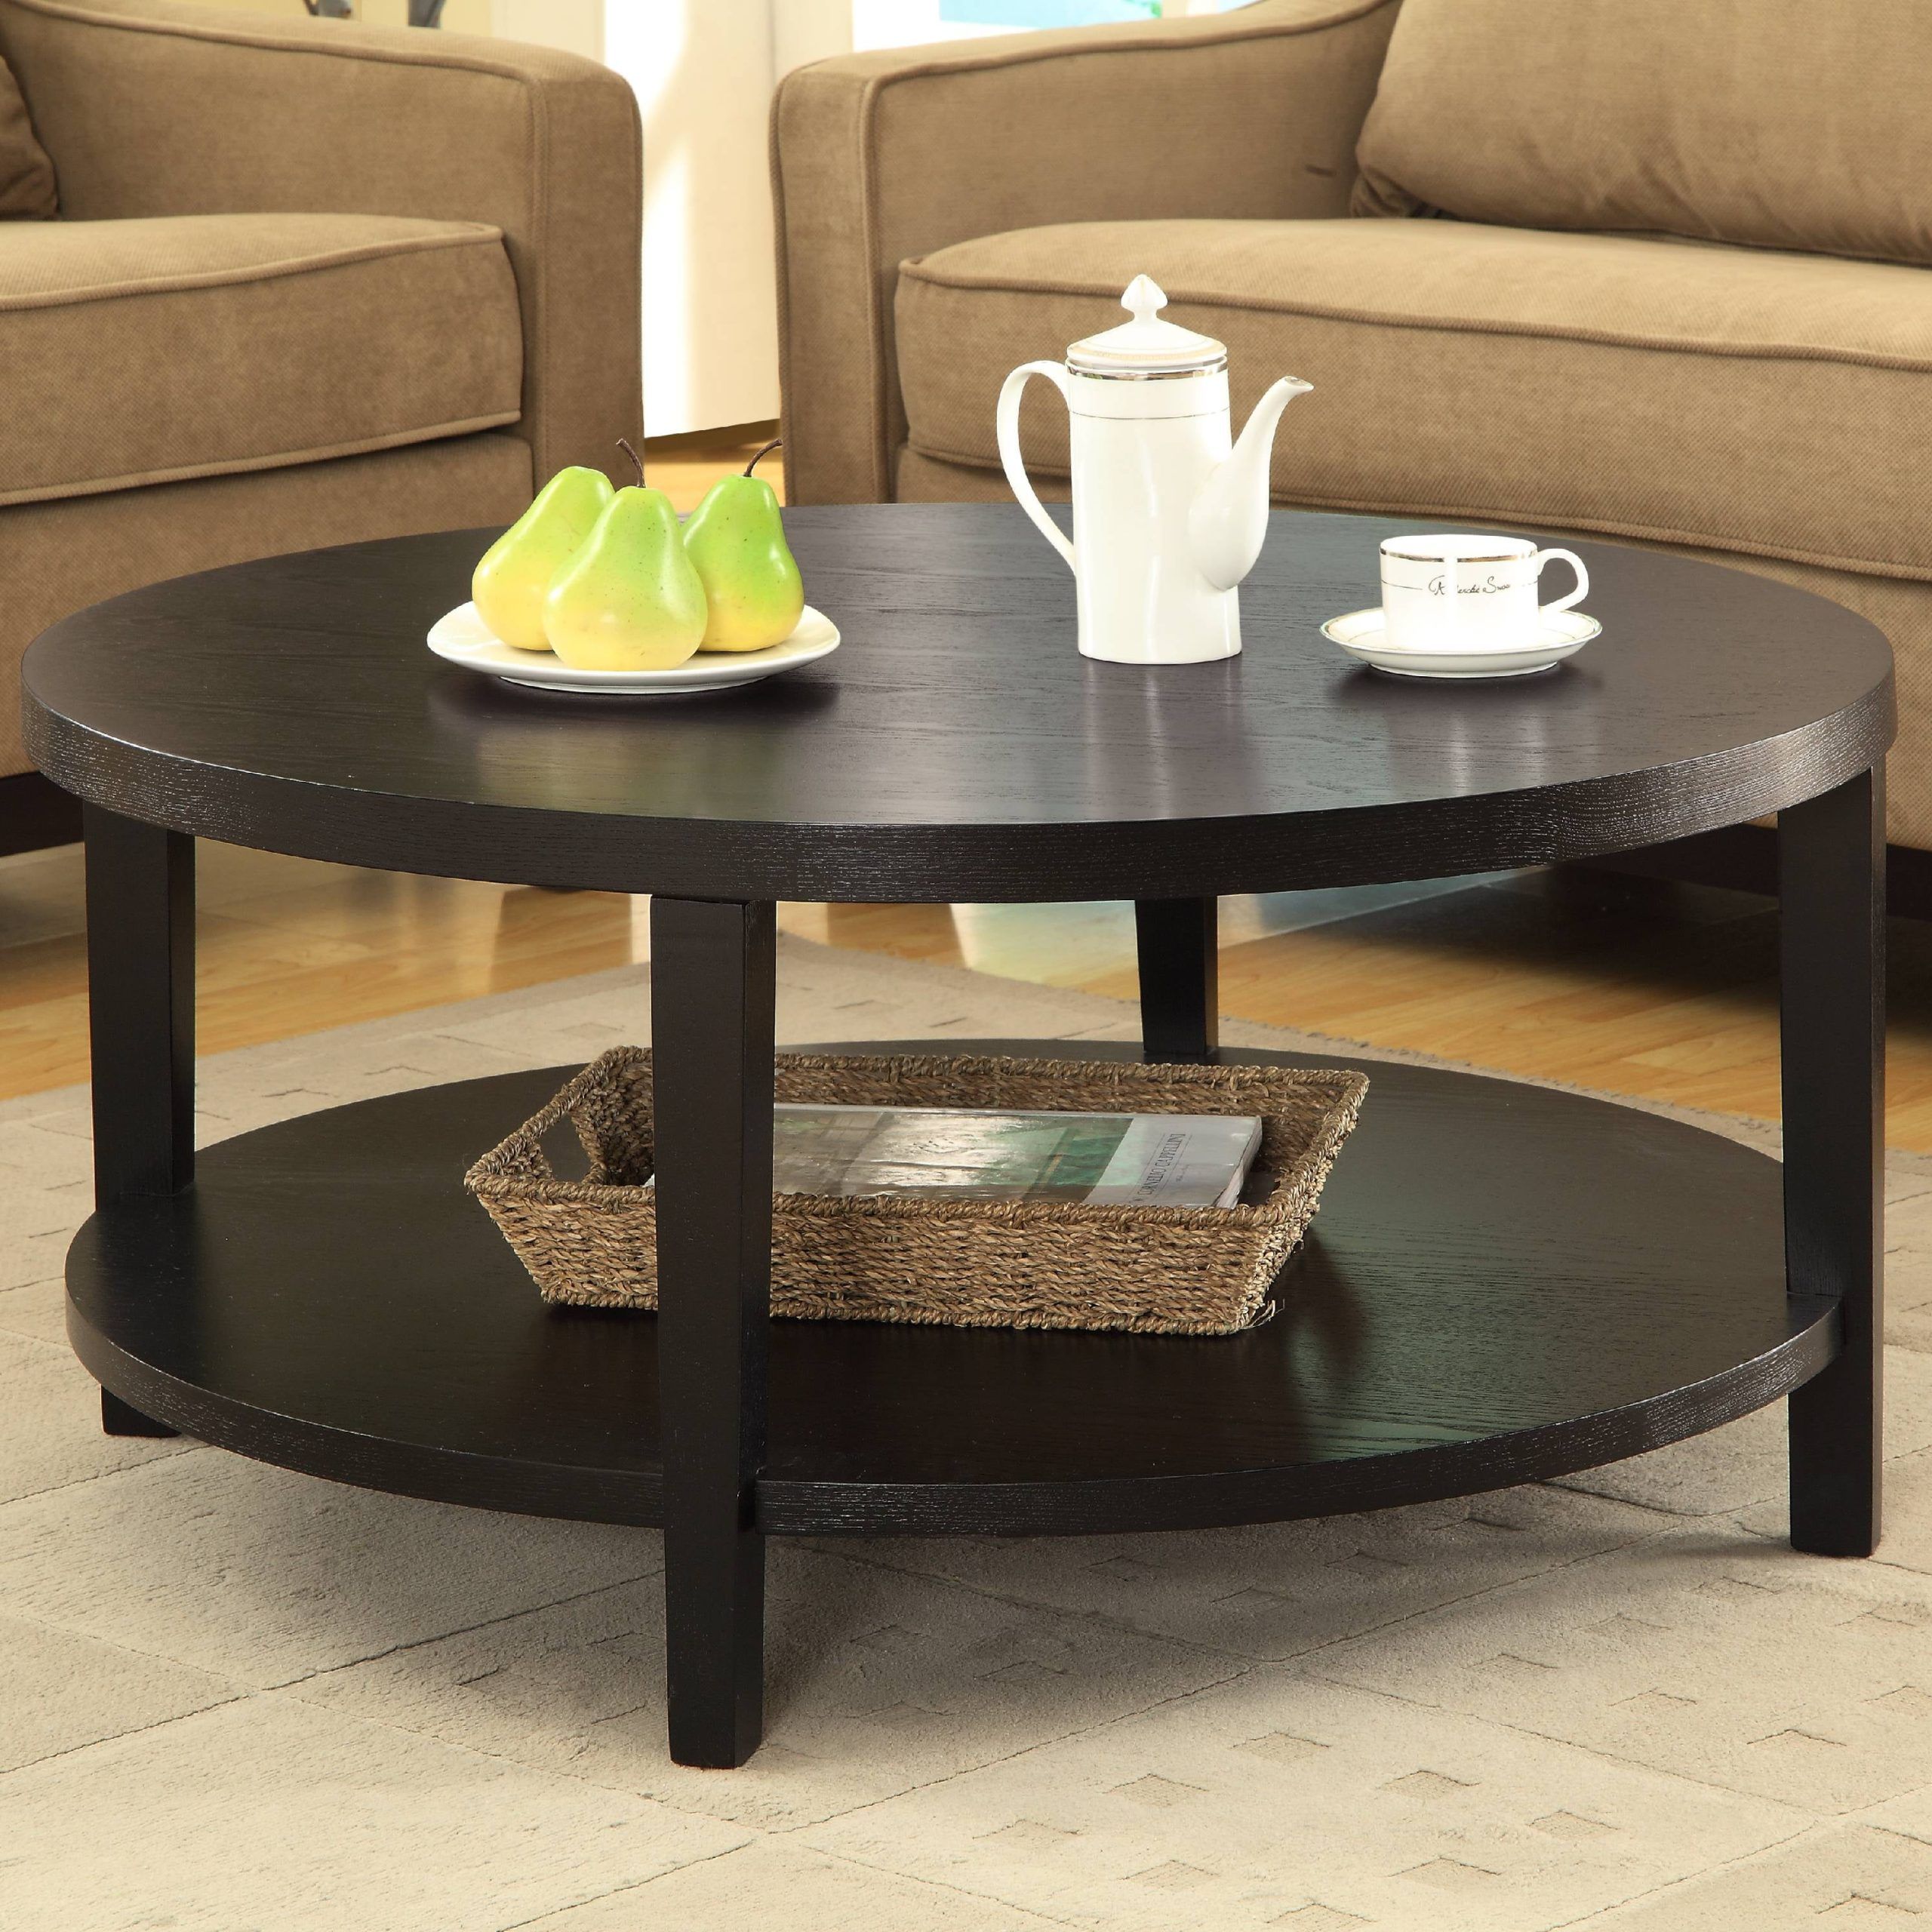 Espresso Round Coffee Table – Southern Enterprises Voyager Espresso Pertaining To Southern Enterprises Larksmill Coffee Tables (View 19 of 20)